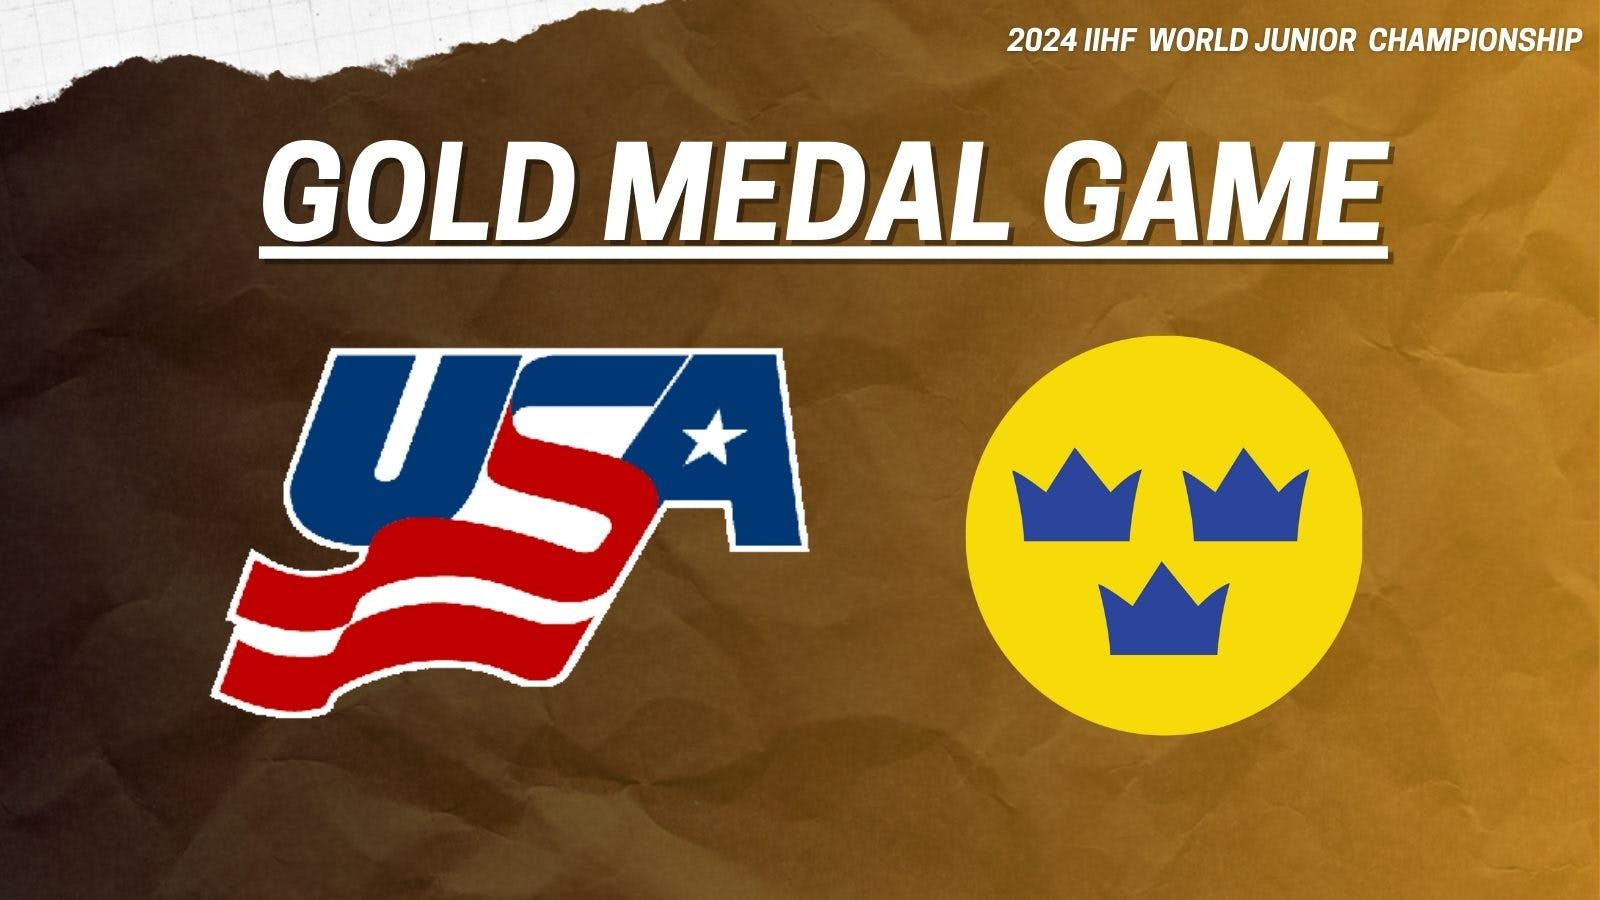 USA beats Sweden to win gold at 2024 World Junior Championship